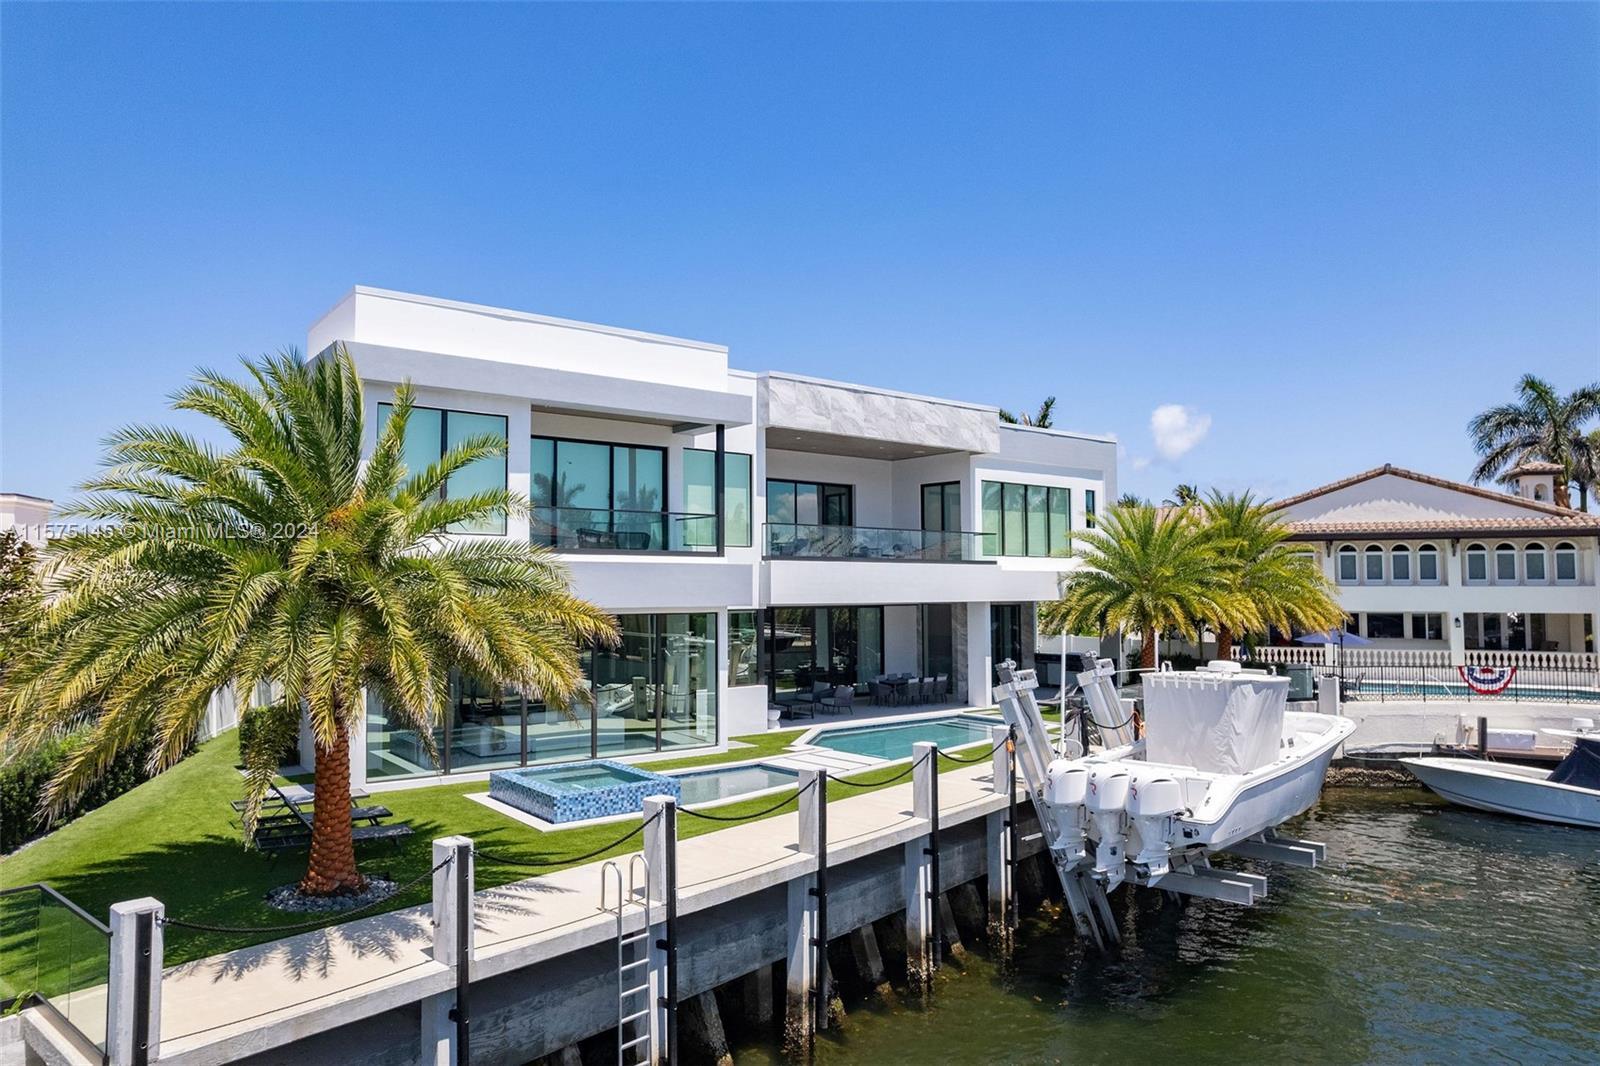 Welcome to 749 Bamboo Drive, located in the prestigious waterfront community of South Florida.This c